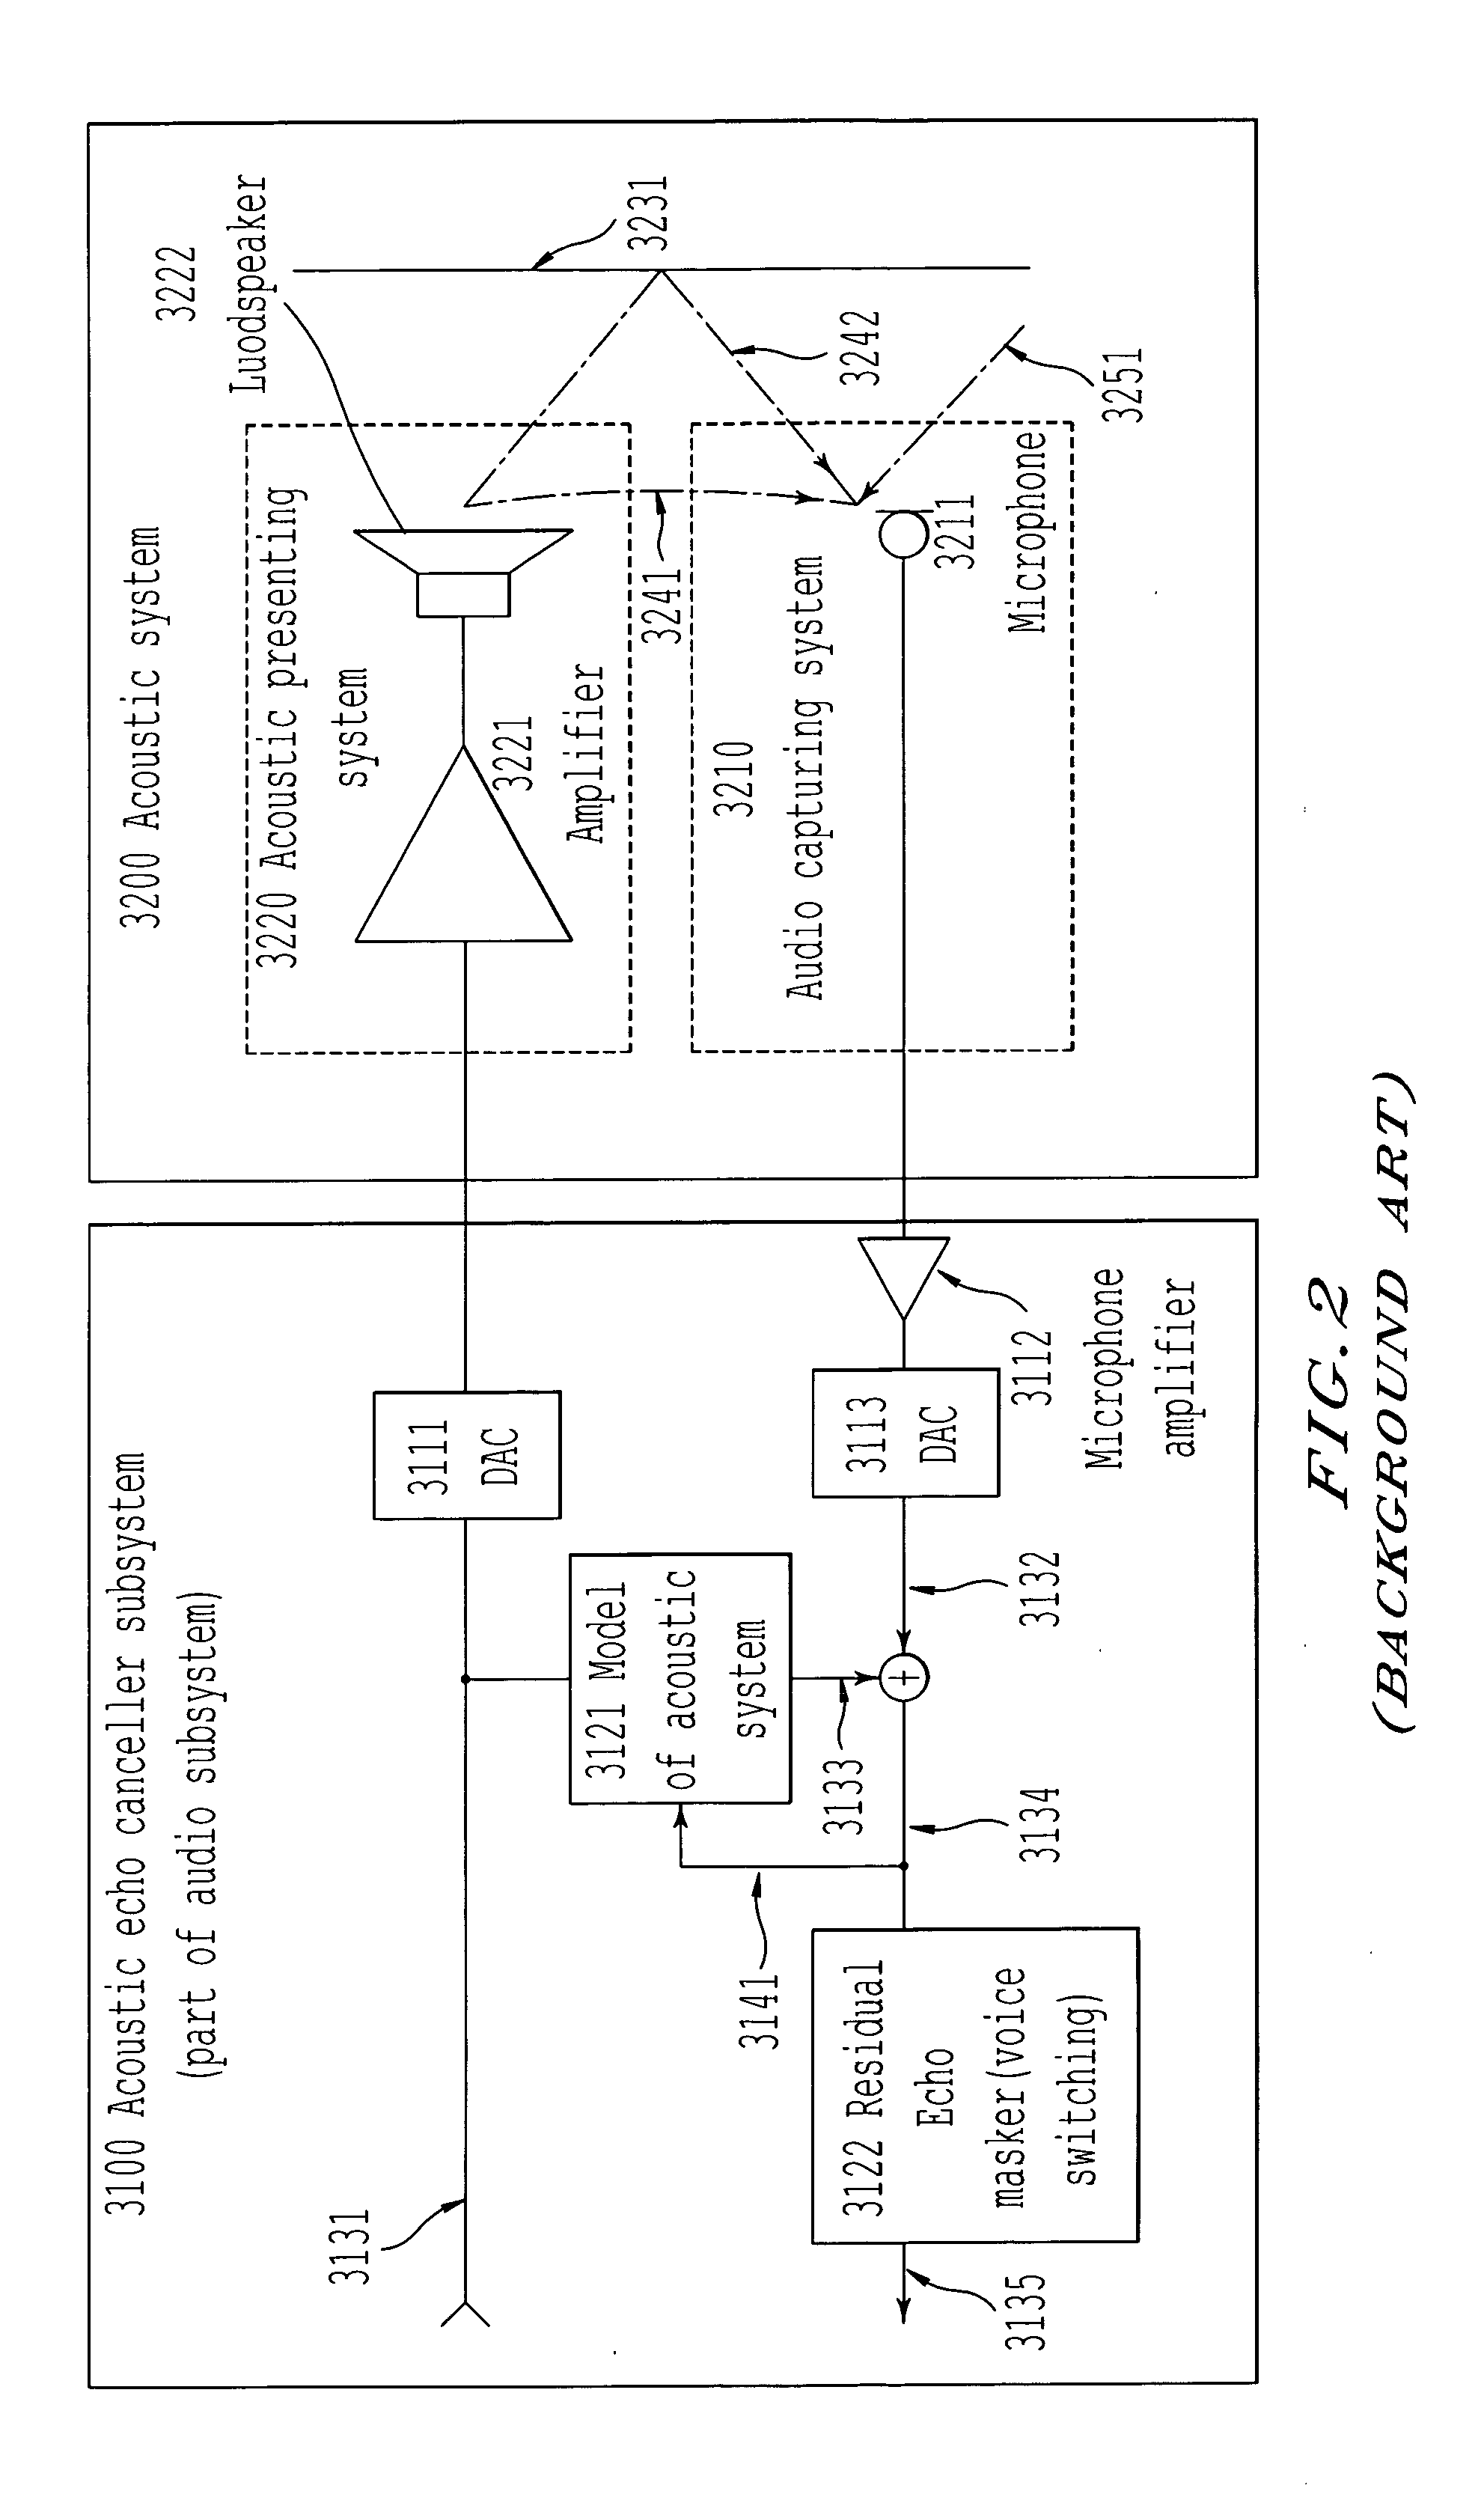 System and method for enhanced subjective stereo audio